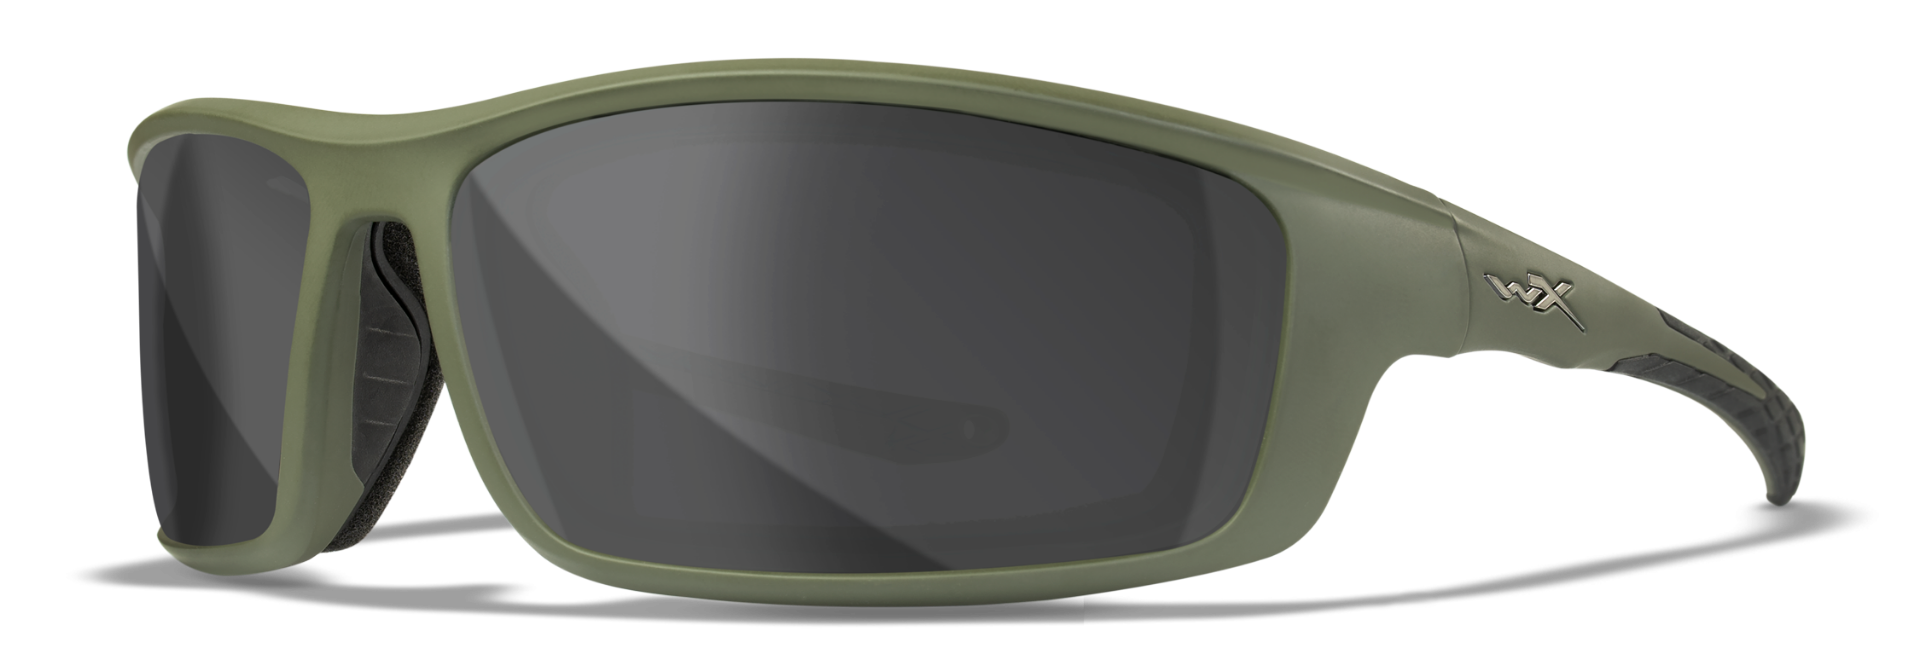 Wiley X WX GRID Oval Sunglasses  Matte Utility Green 70-18-122